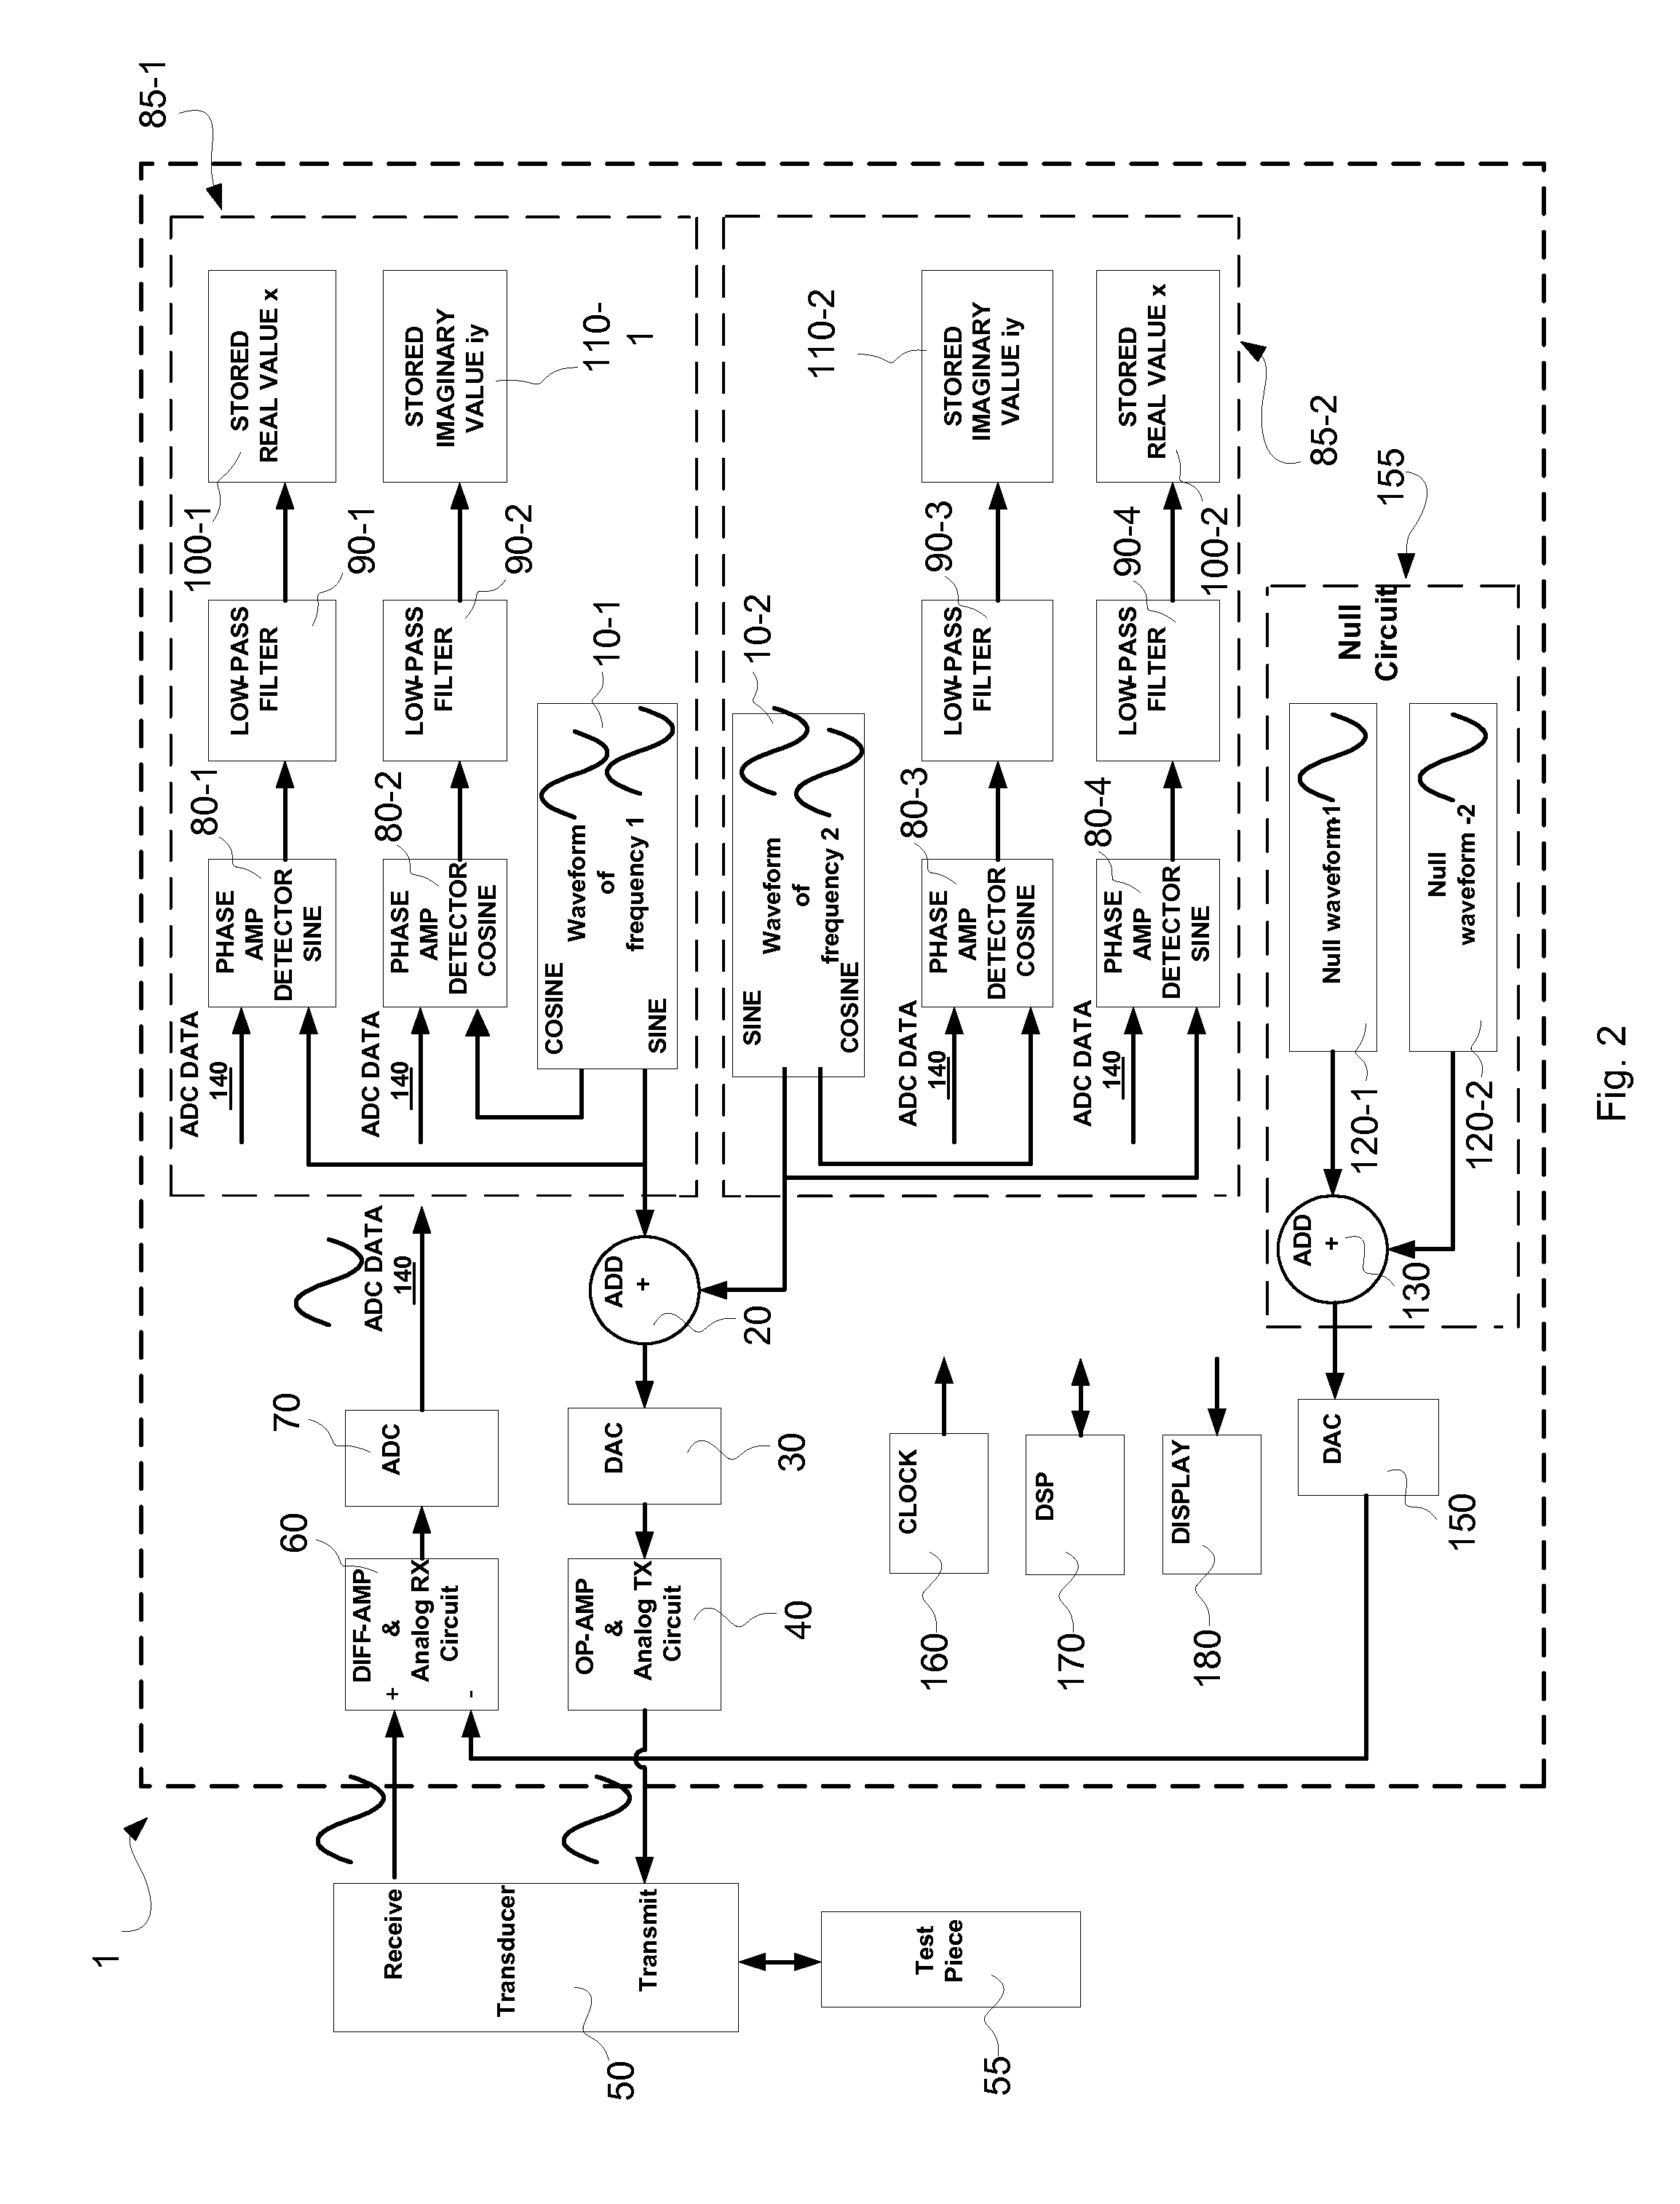 Circuitry for measuring and compensating phase and amplitude differences in ndt/ndi operation